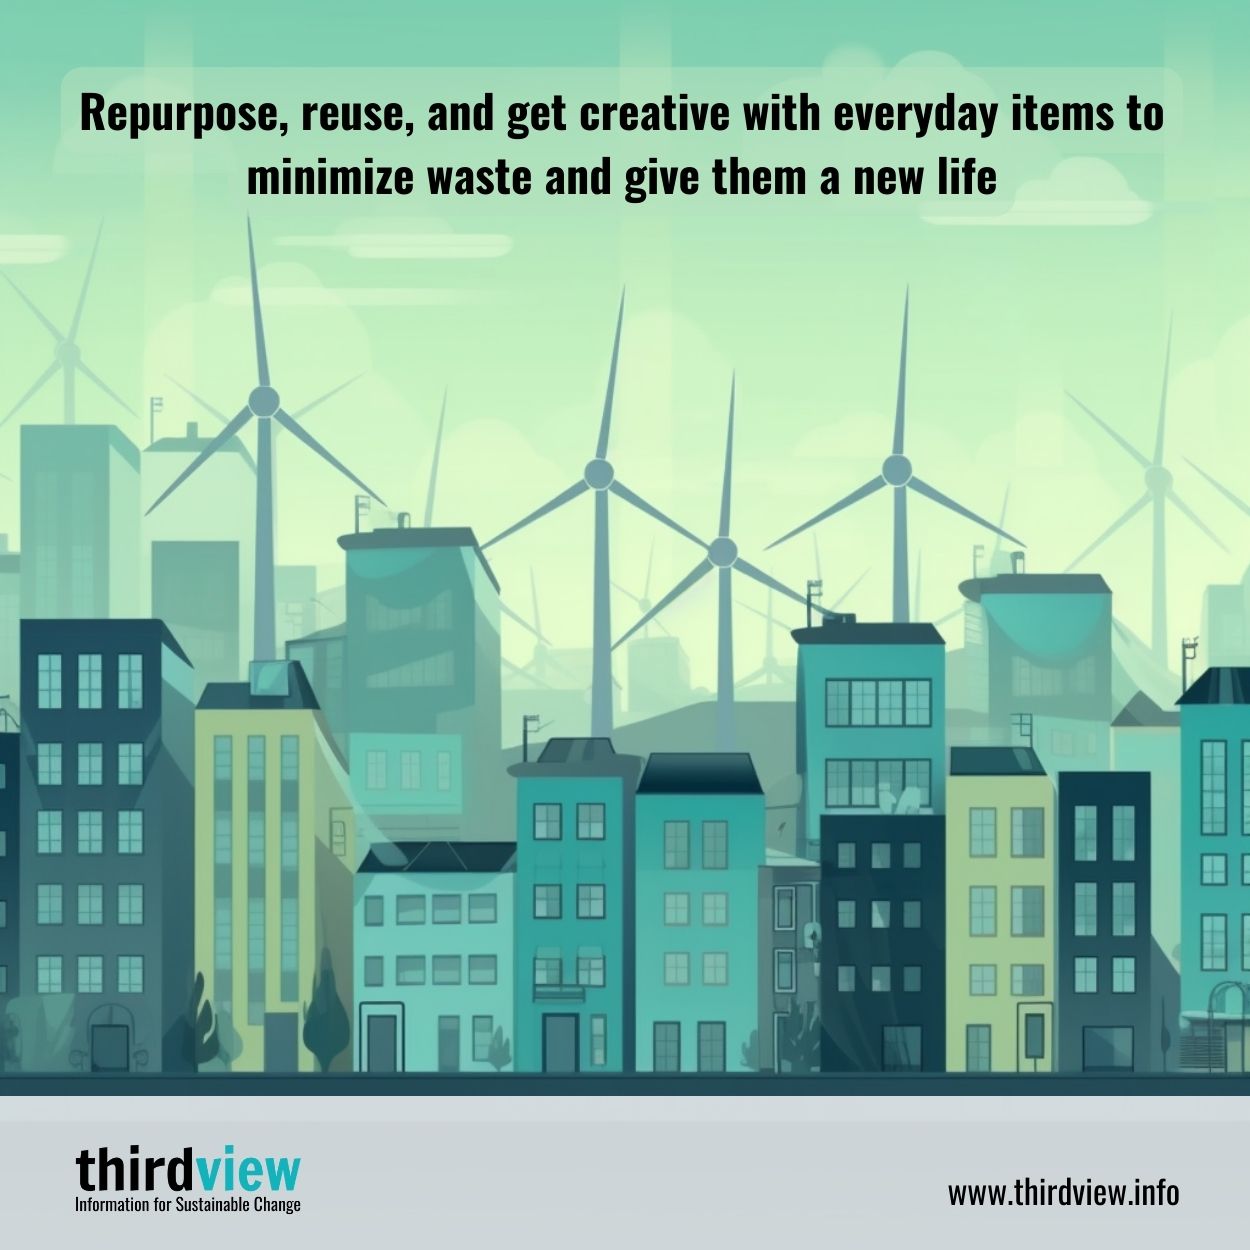 Repurpose, reuse, and get creative with everyday items to minimize waste and give them a new life.